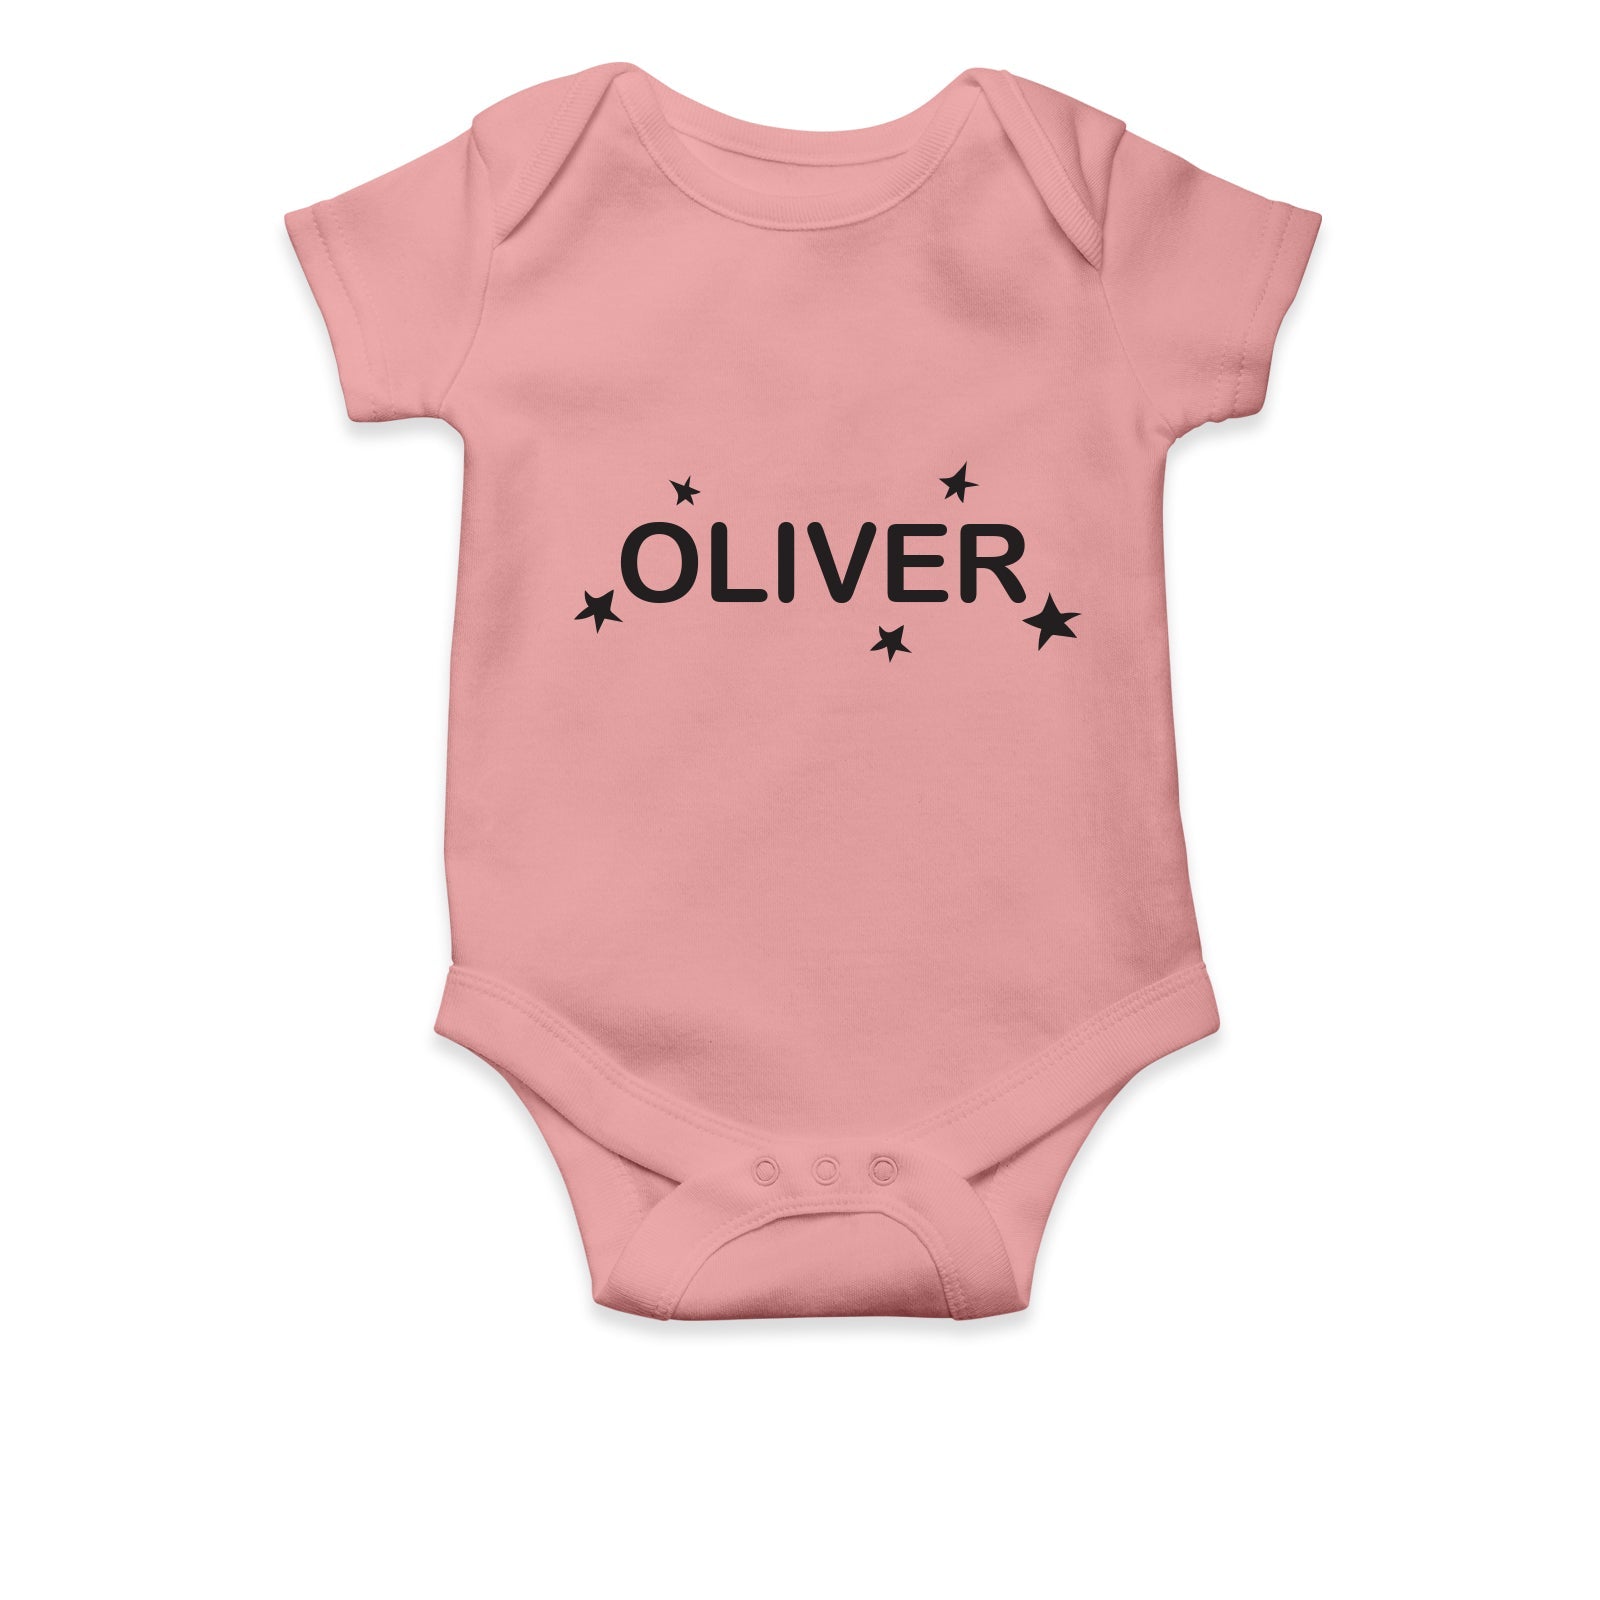 Personalised White Baby Body Suit Grow Vest - Galaxy